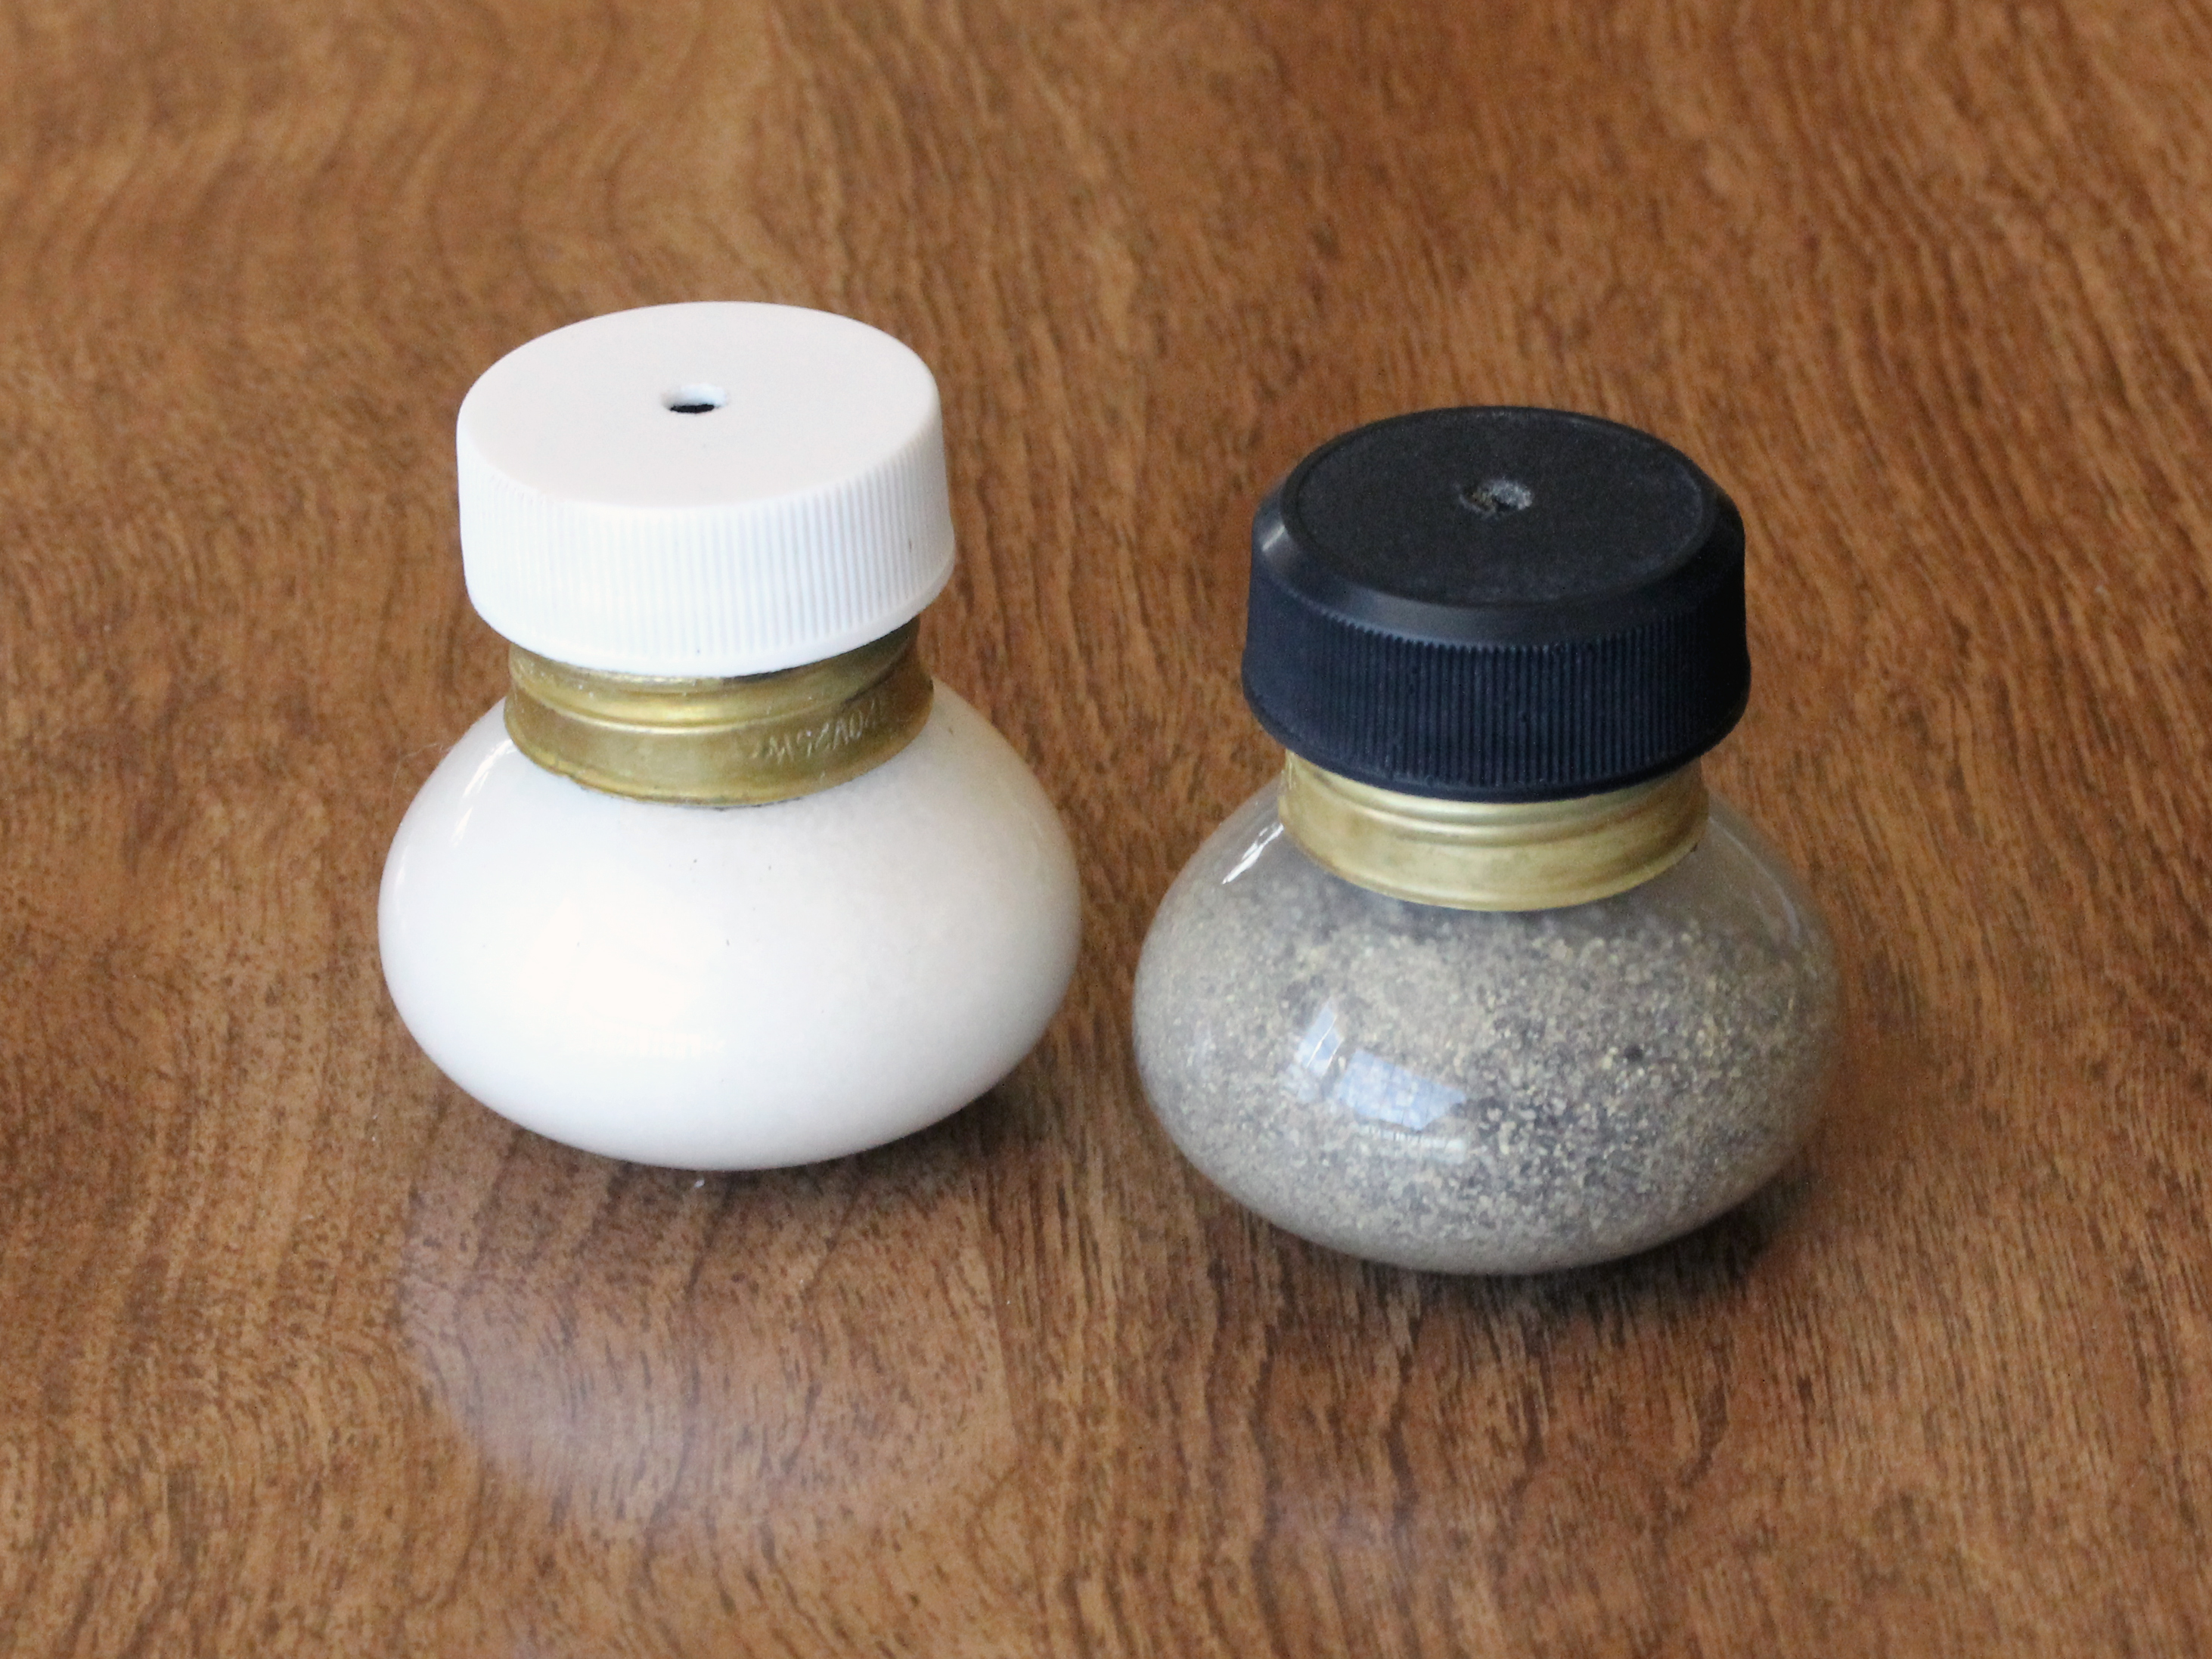 Salt-and-pepper shaker set made from small "floodlight" style lightbulbs and two soda bottle caps.